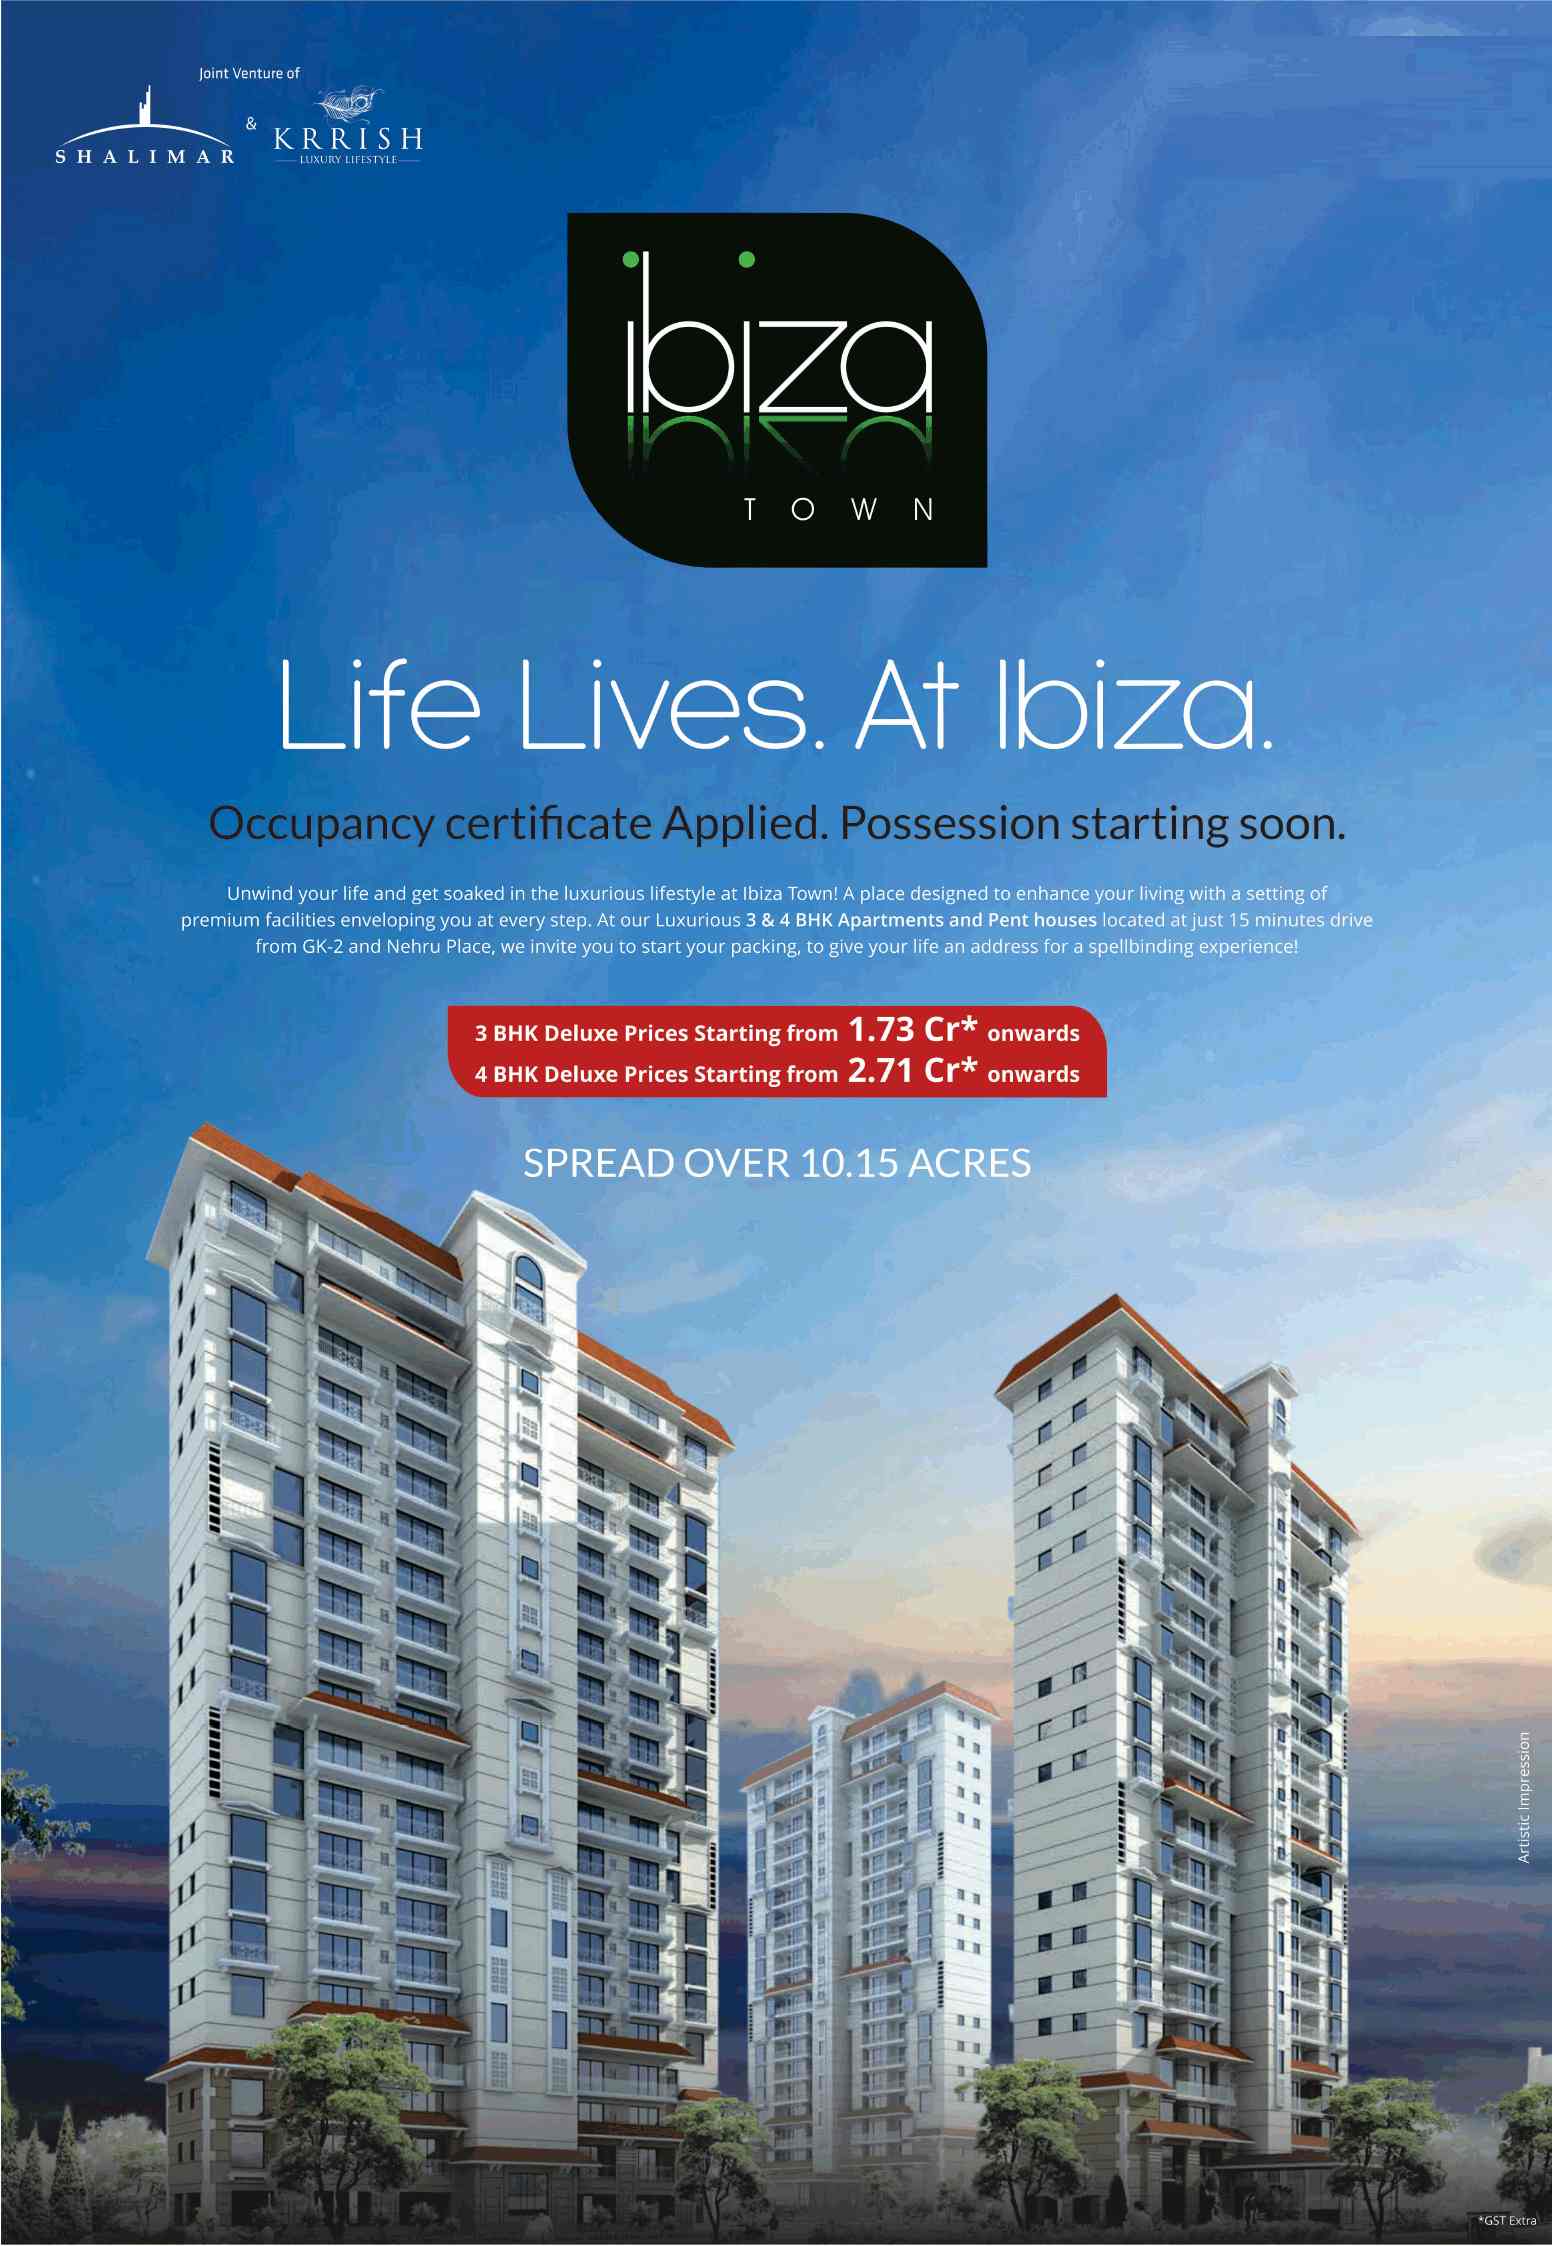 Krrish Shalimar Ibiza Town invites you to give your life an address for a spellbinding experience in Faridabad Update